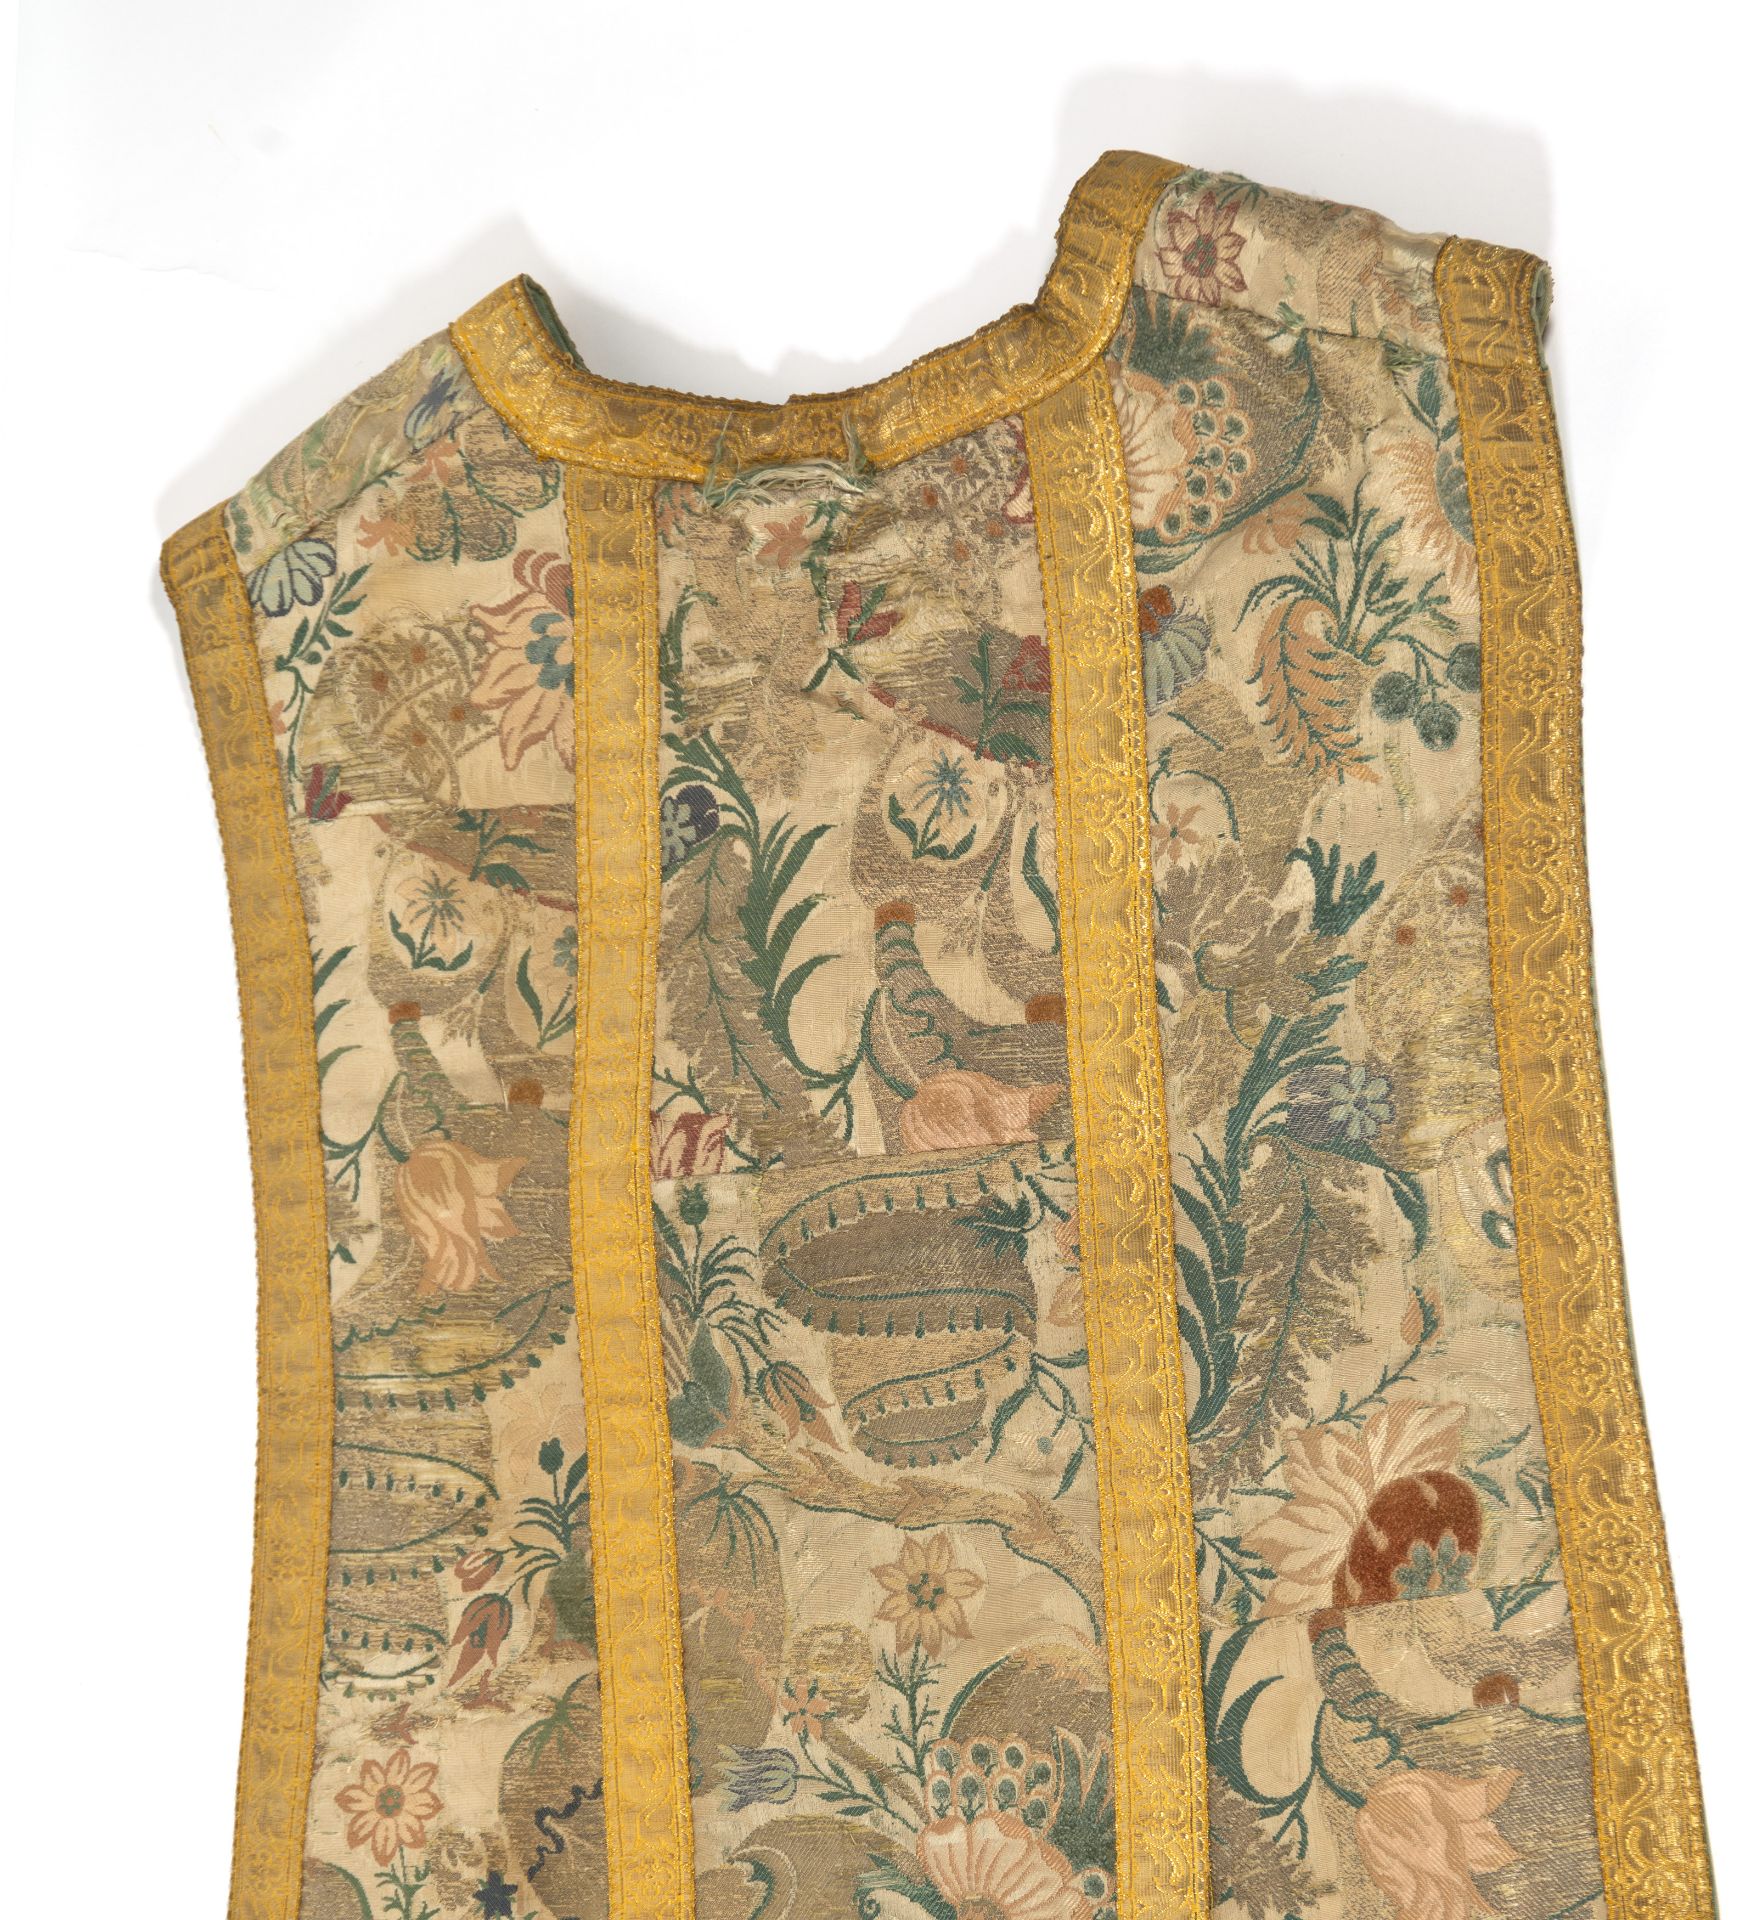 Ecclesiastical Priest's Chasuble, in silk, 19th century - Image 2 of 5